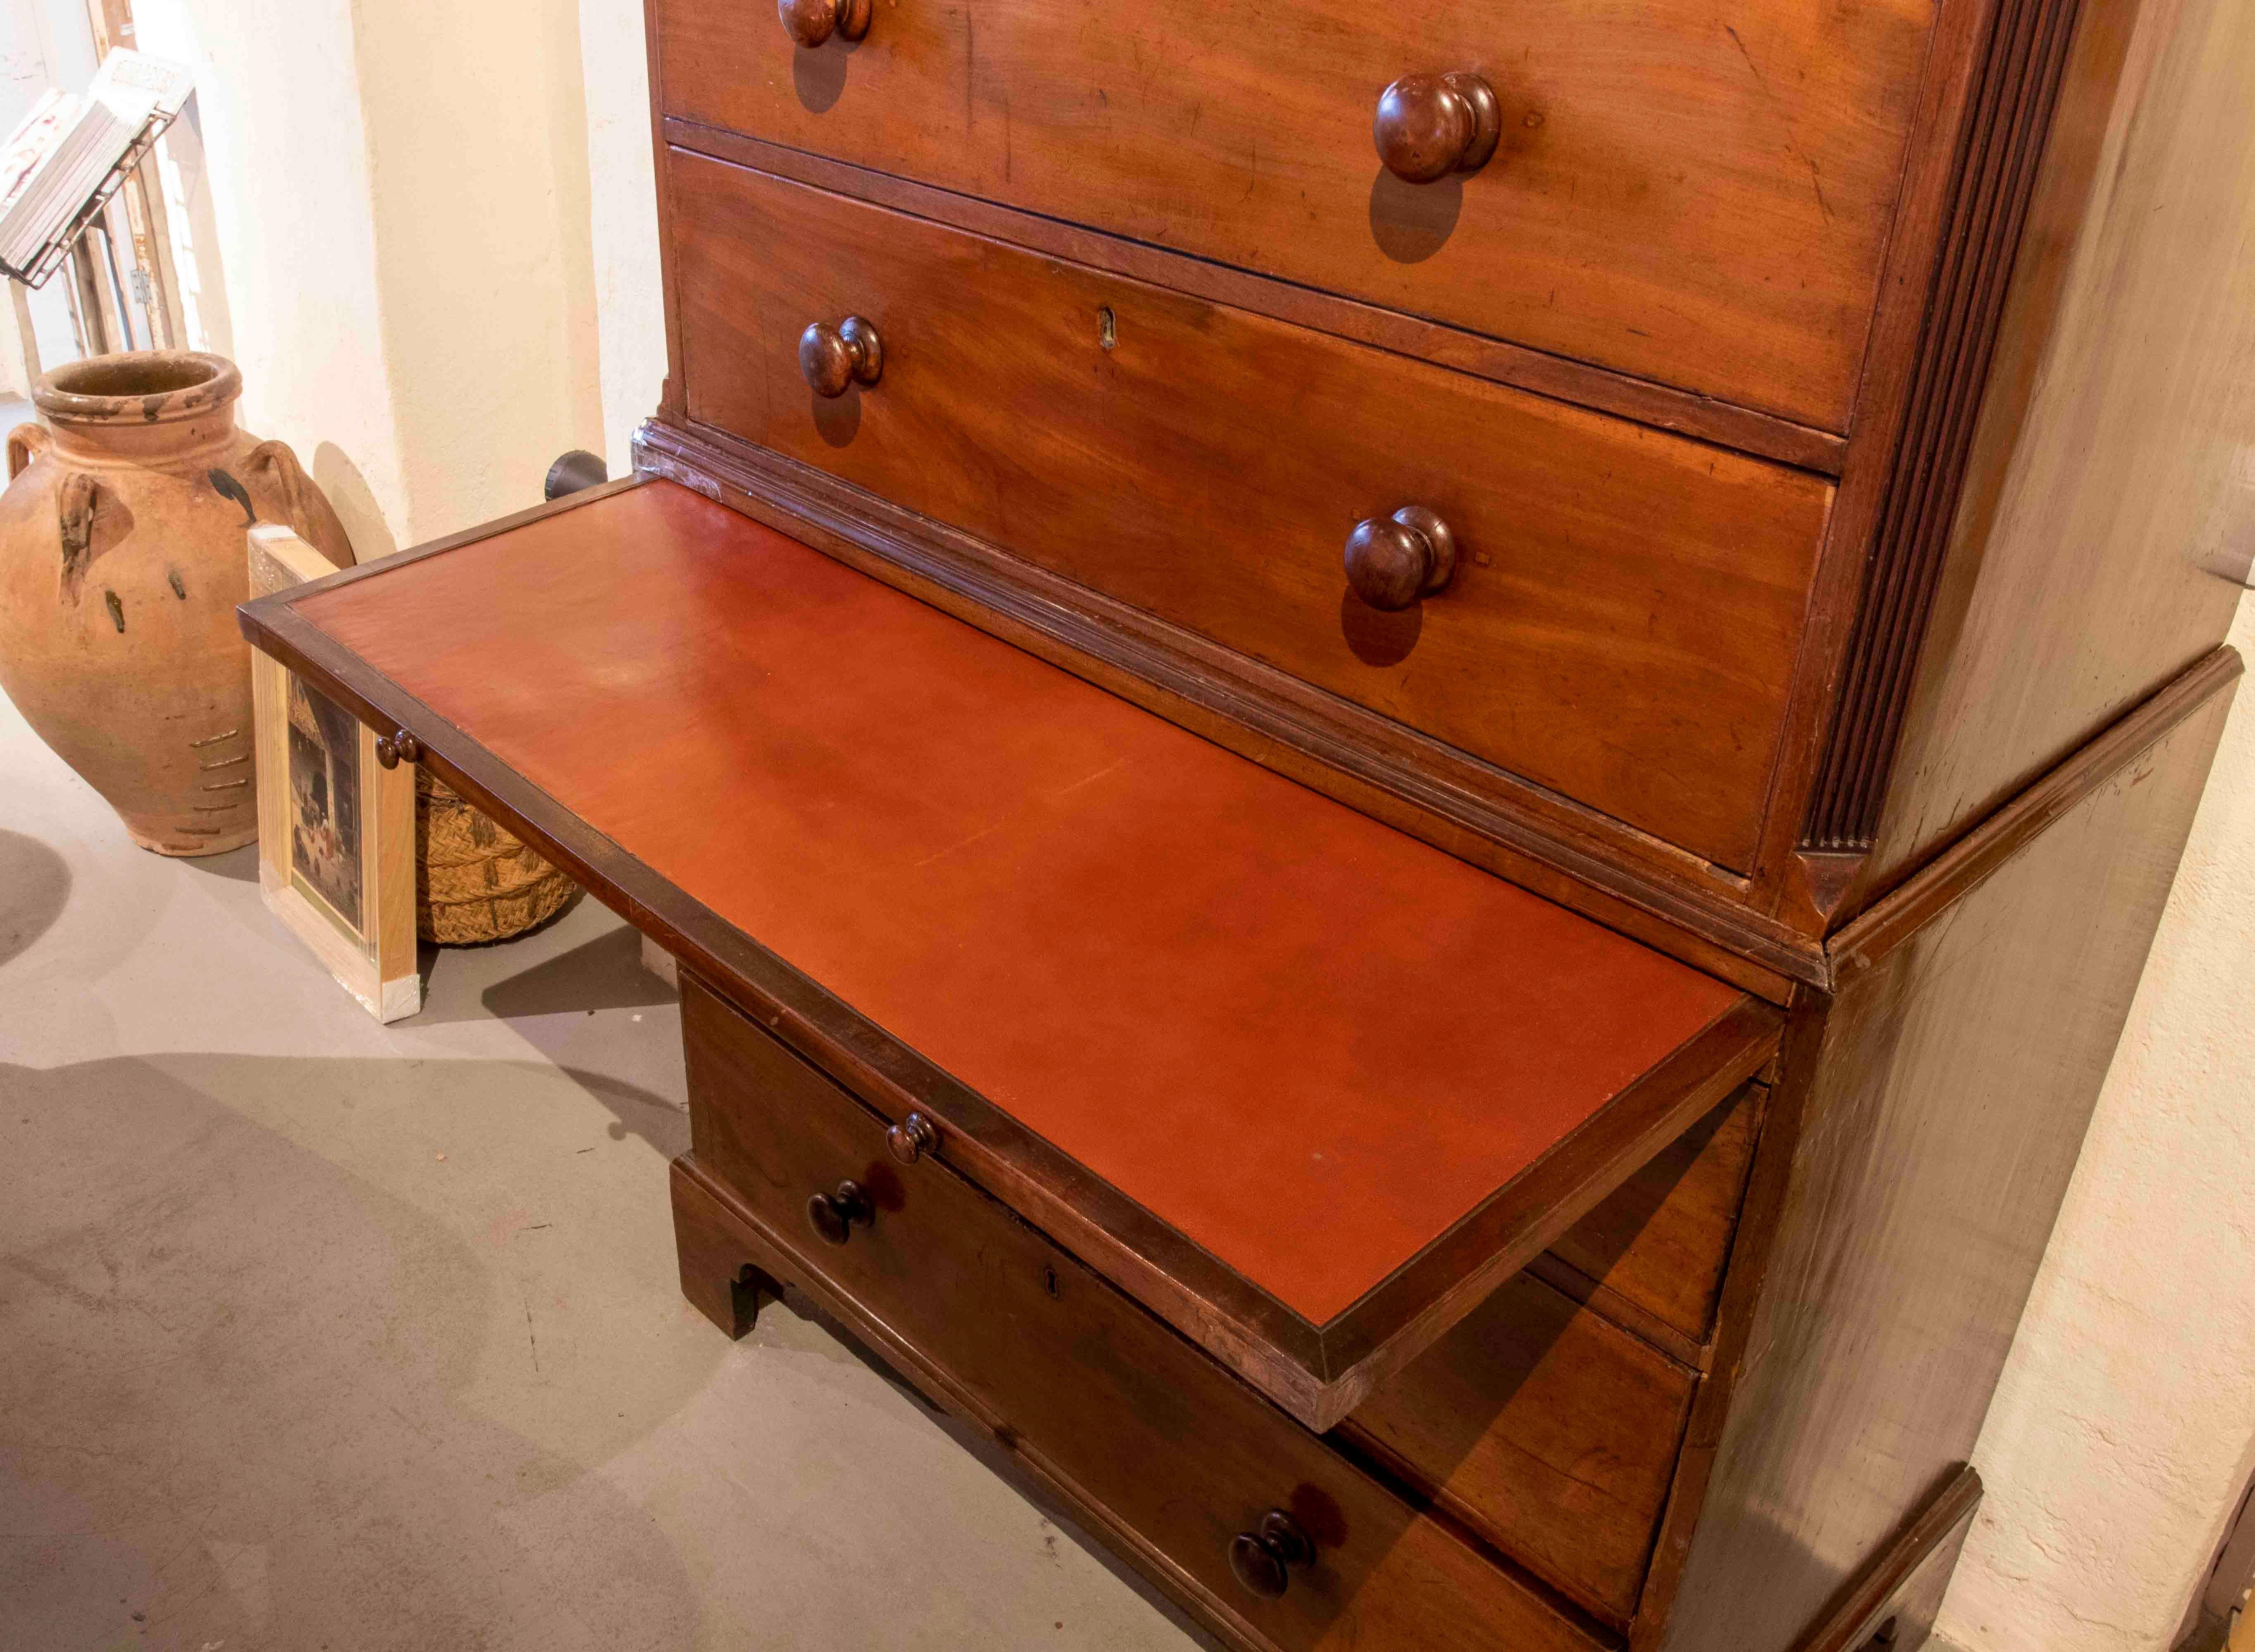 19th Century Chest of Drawers - English Mahogany Two-body Desk For Sale 4